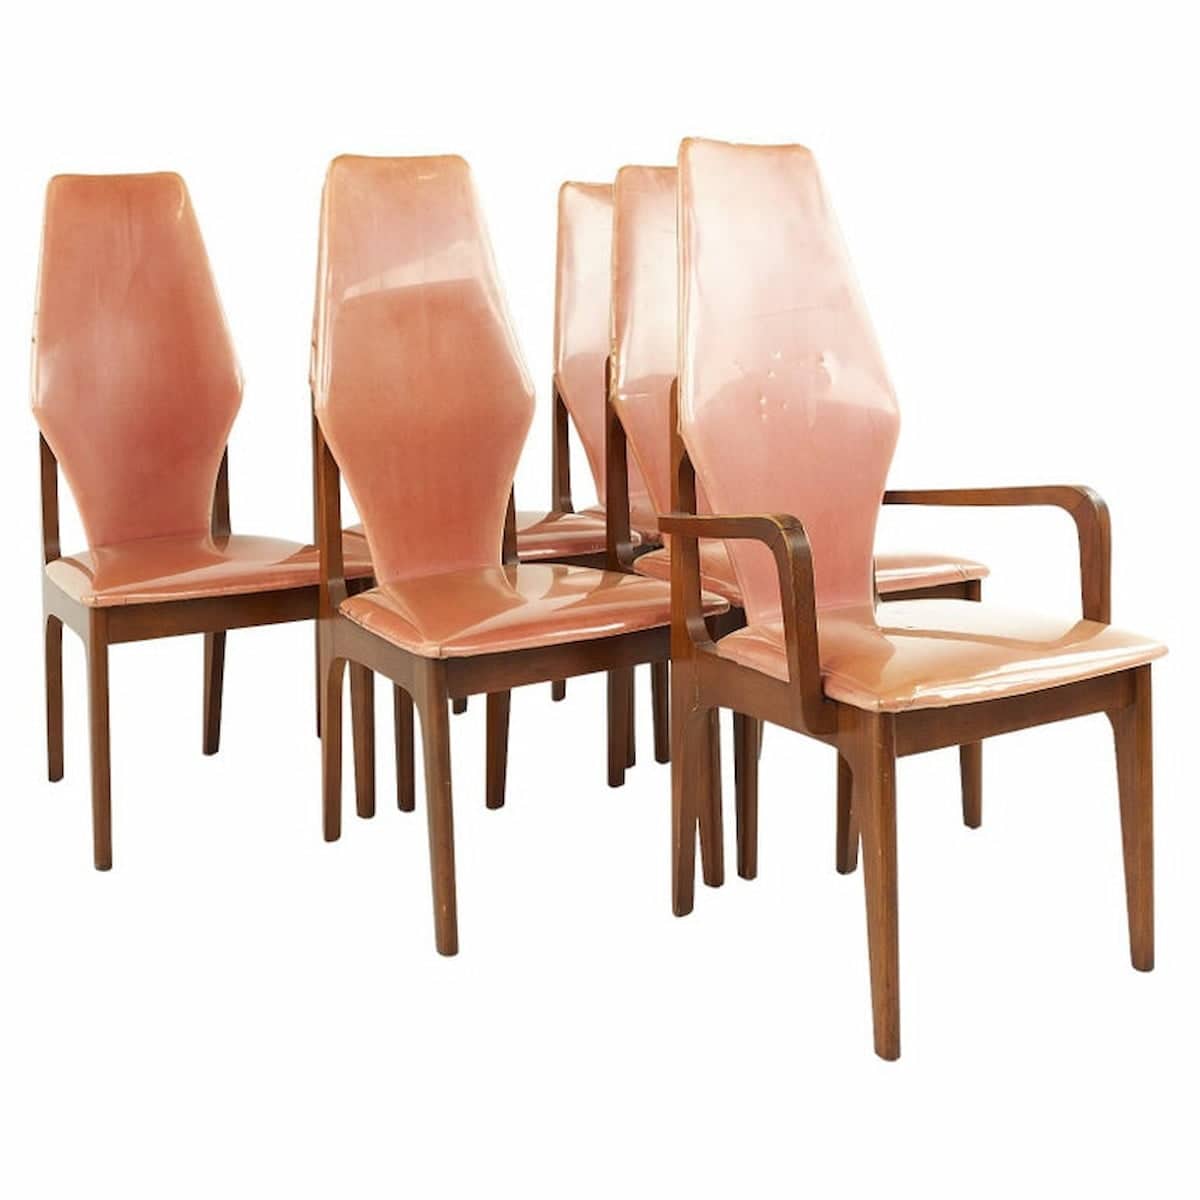 Adrian Pearsall Style Mid Century Walnut Dining Chairs - Set of 6